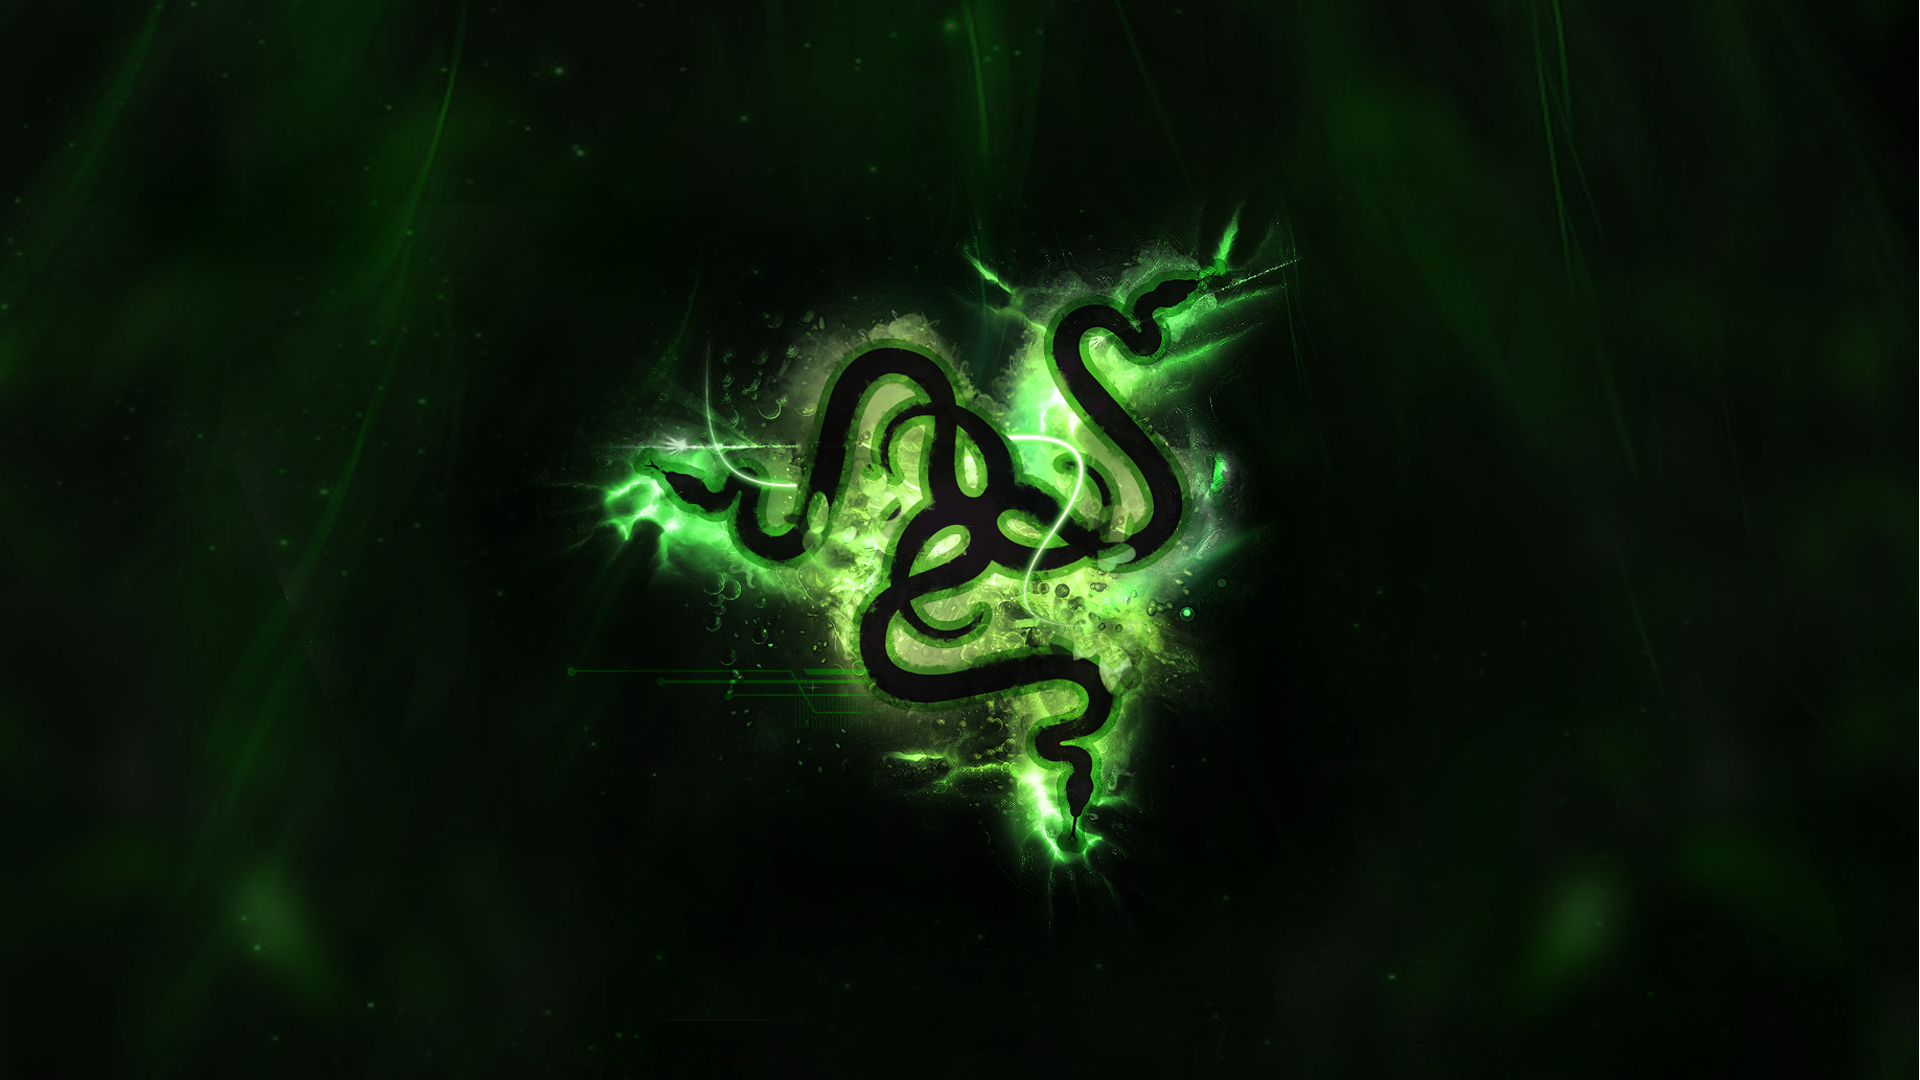 Pin Razer Windows 1920x1080 1366820 Wallpaper By Firreal Picture on